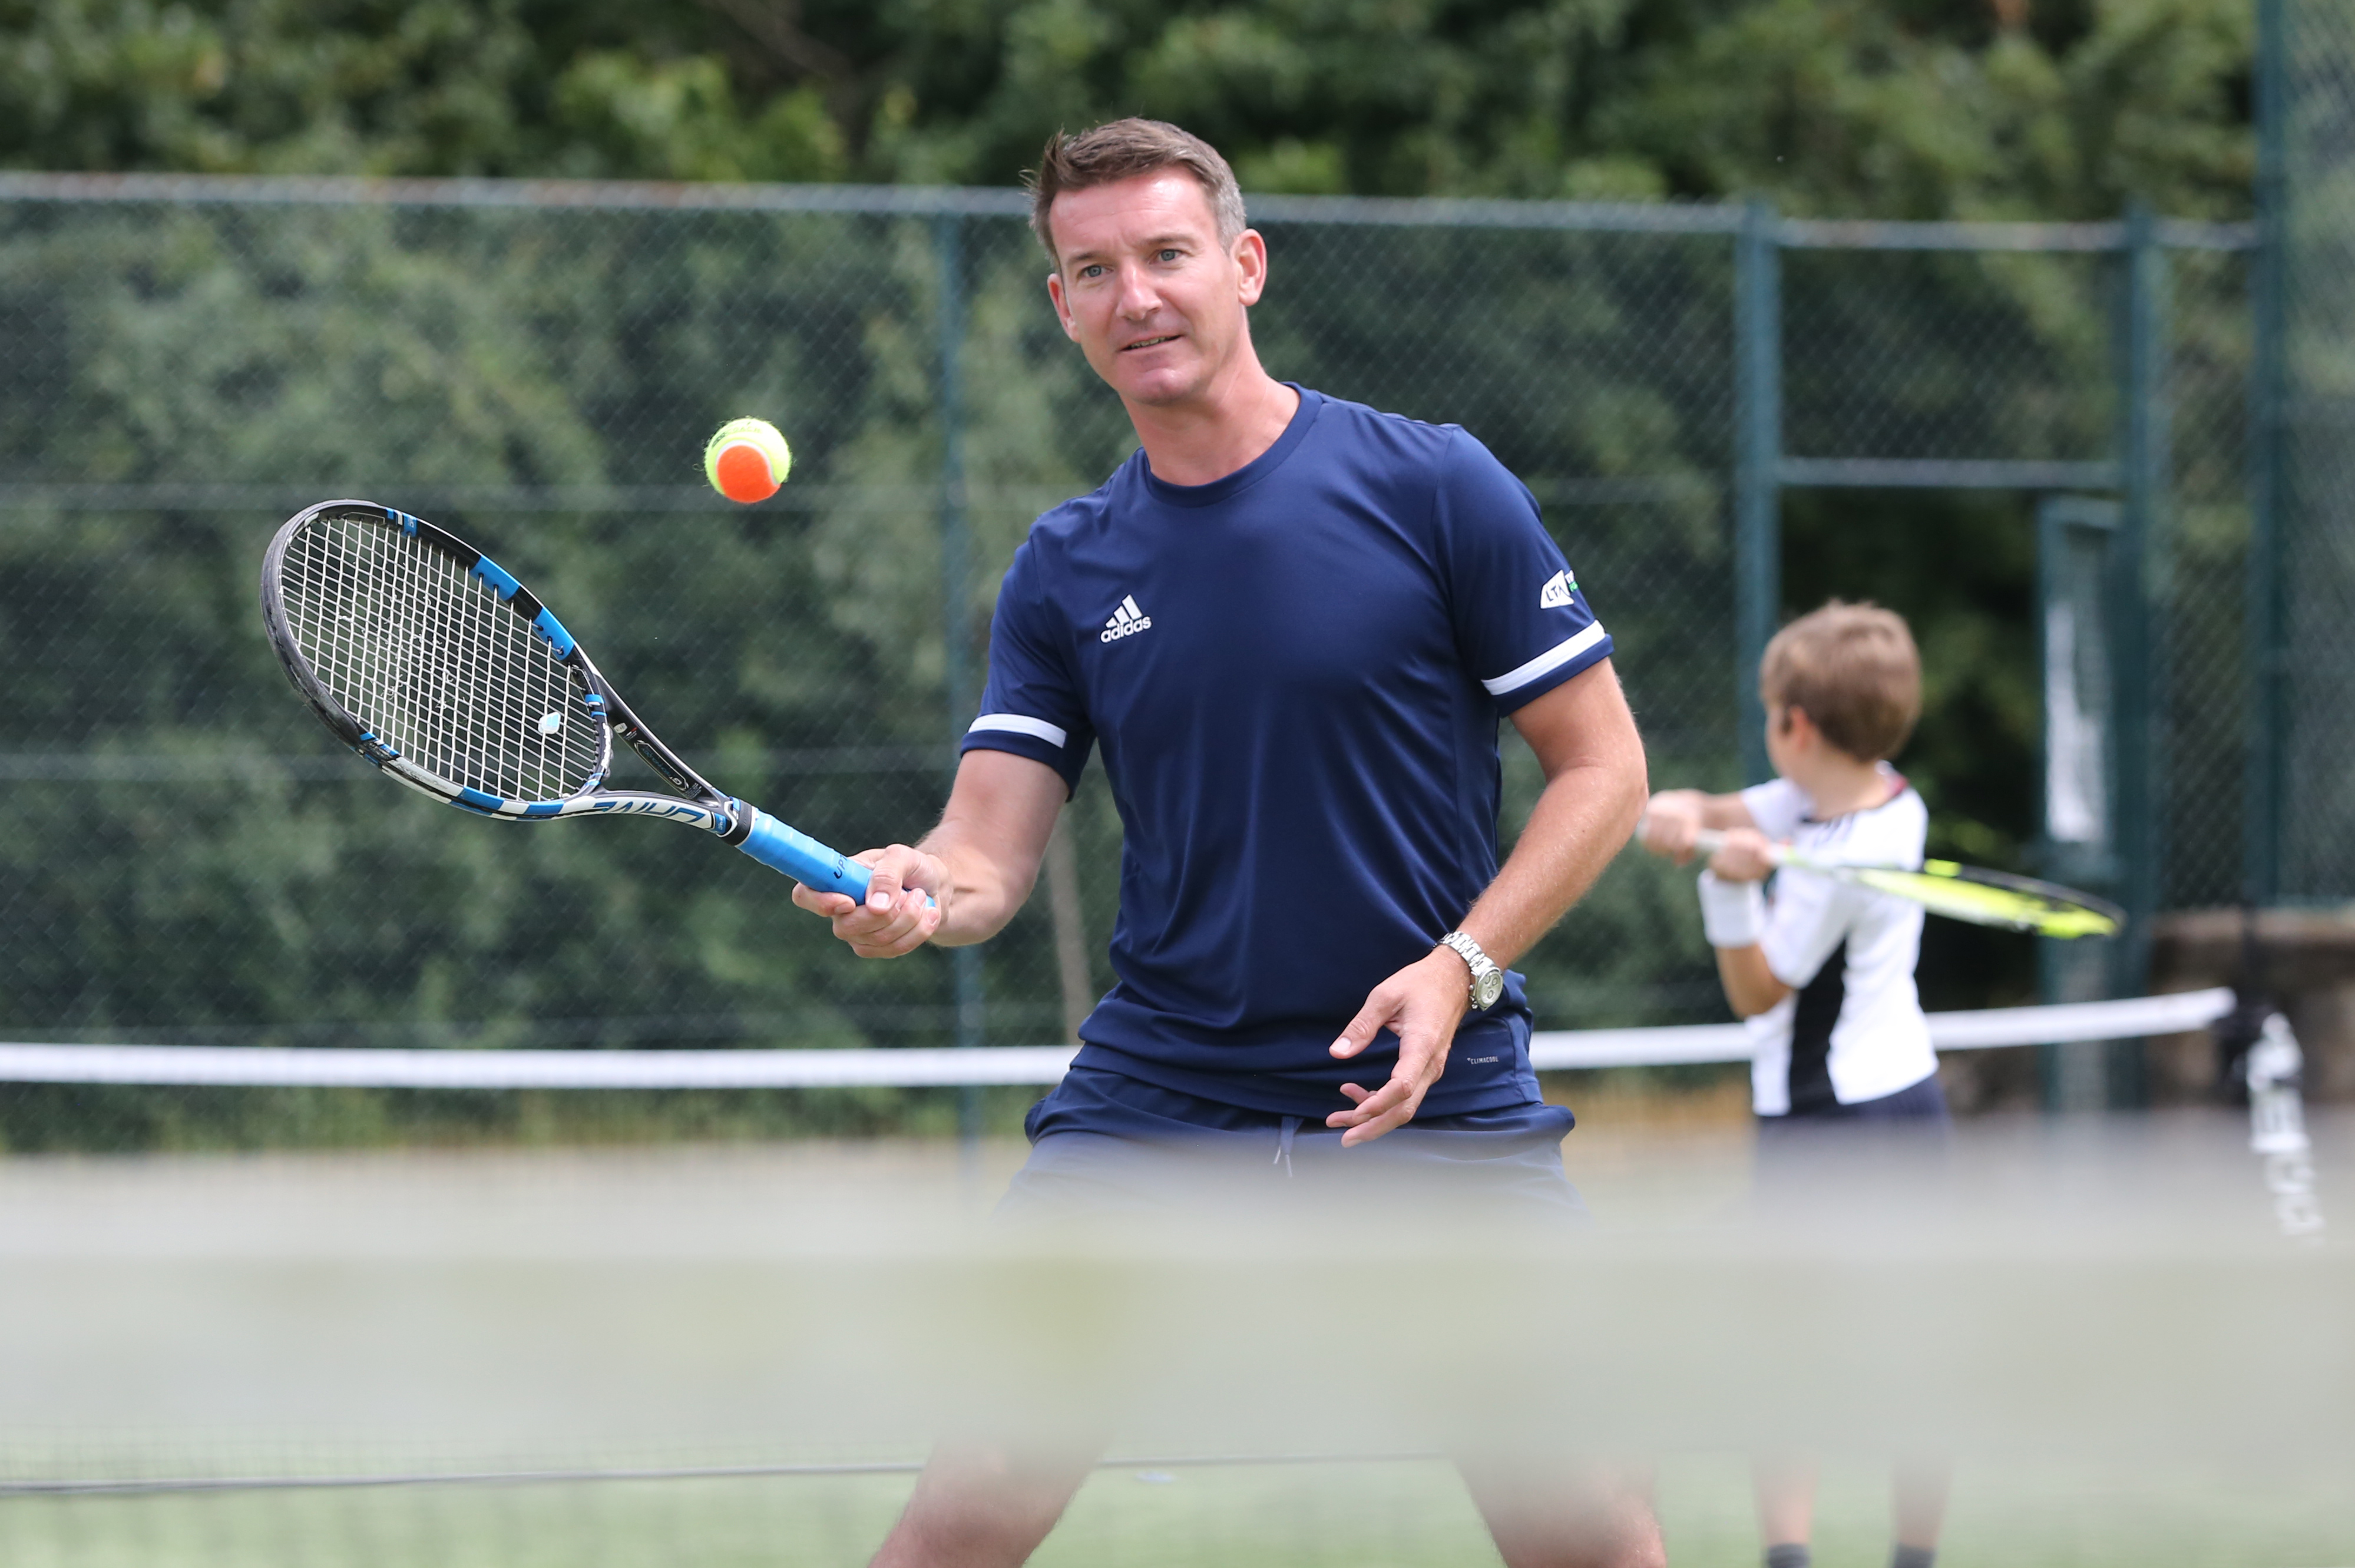 Lawn Tennis Association chief executive Scott Lloyd is calling for urgent funding for indoor tennis centres